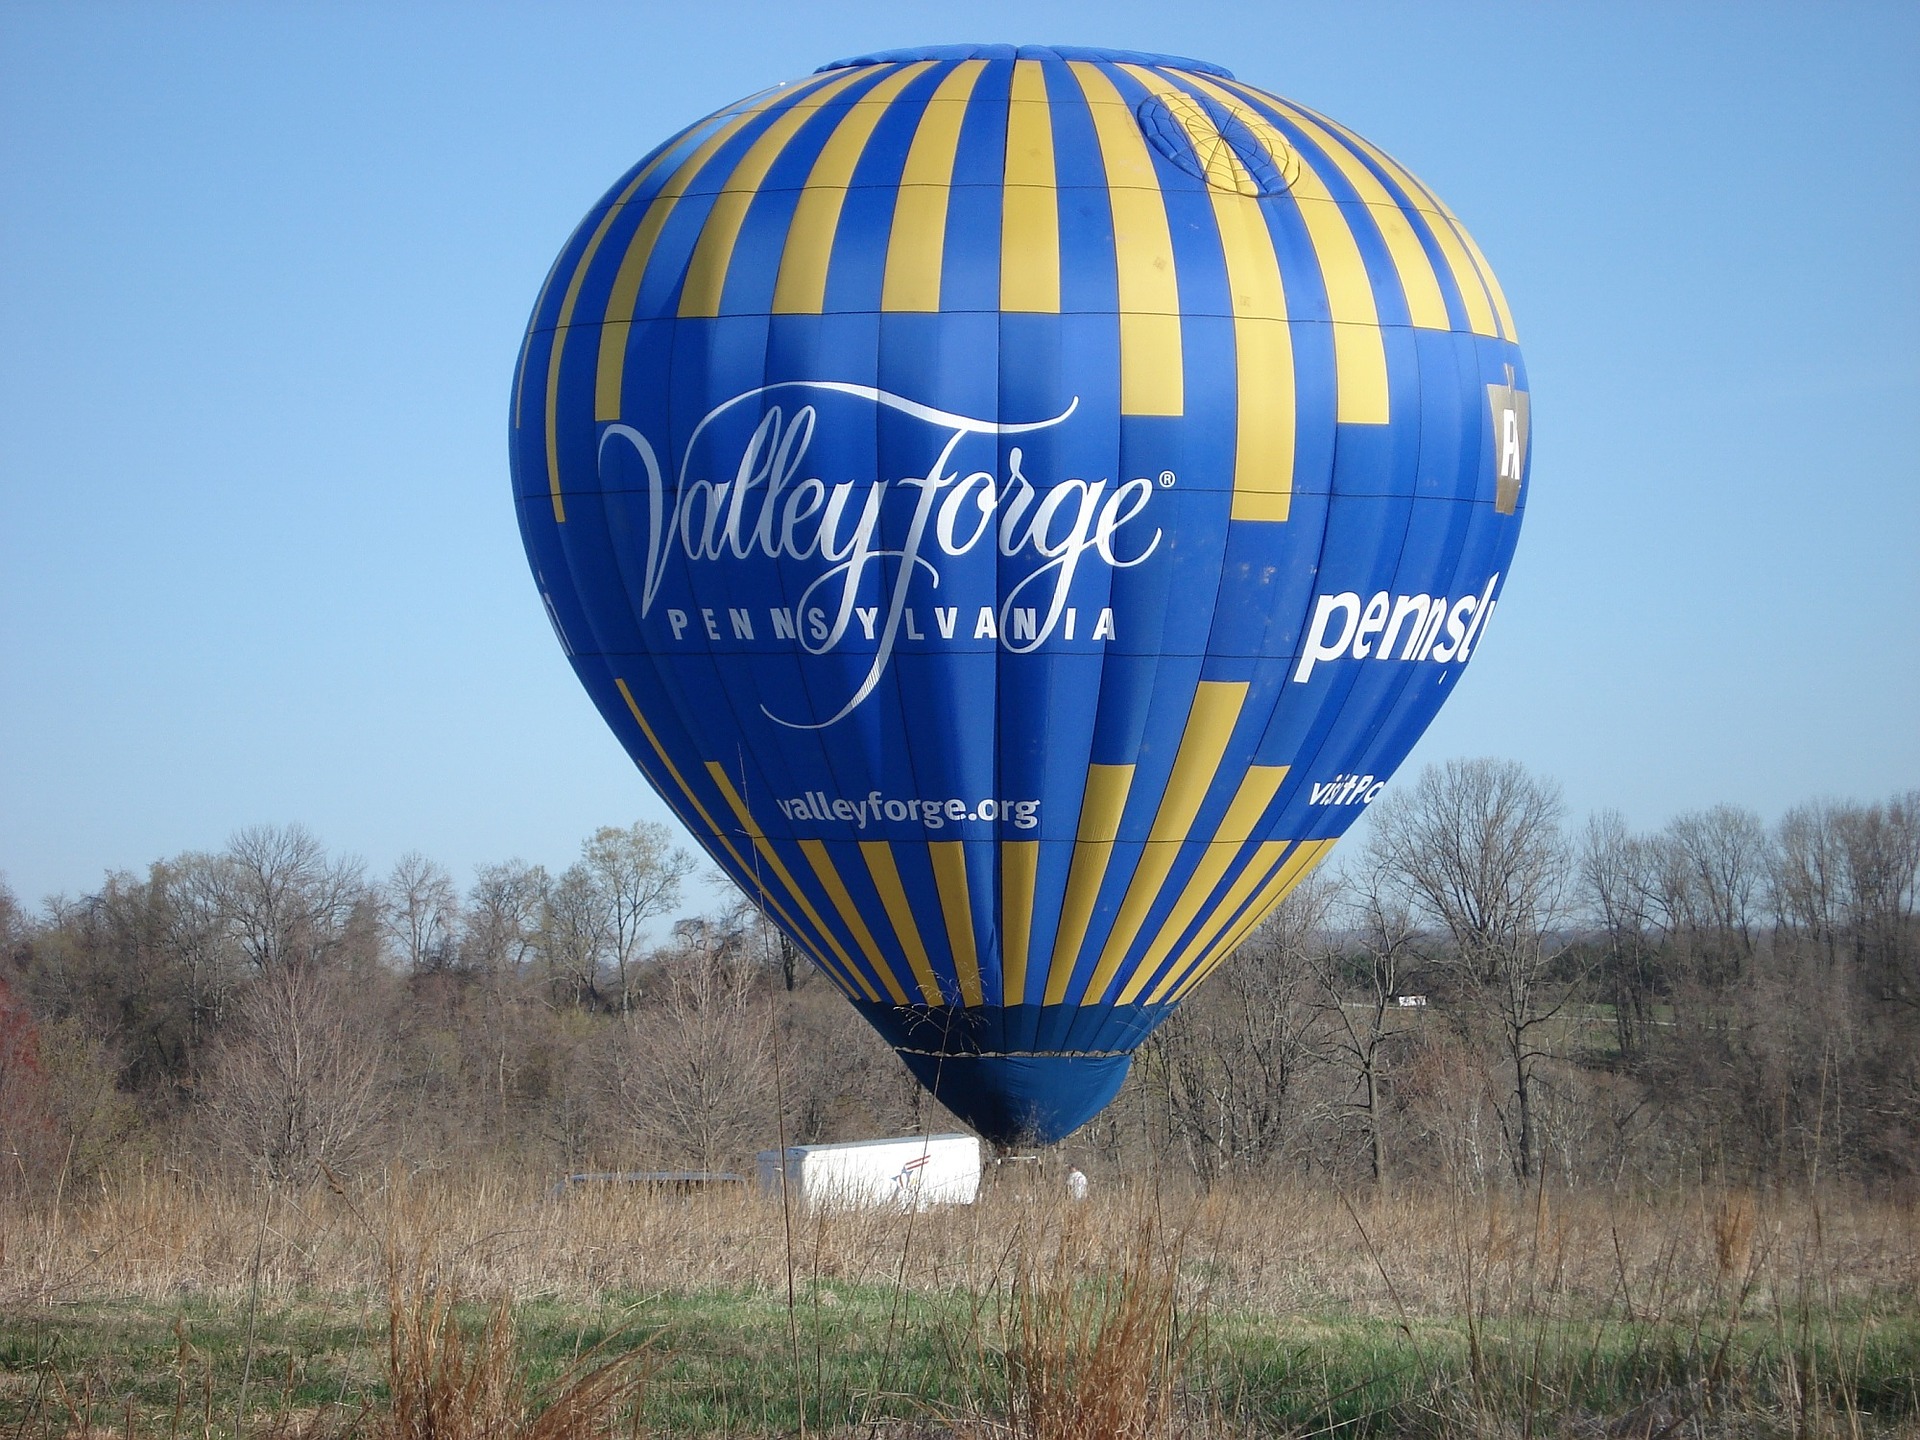 Blue and yellow hot air balloon that reads "Valley Forge Pennsylvania"